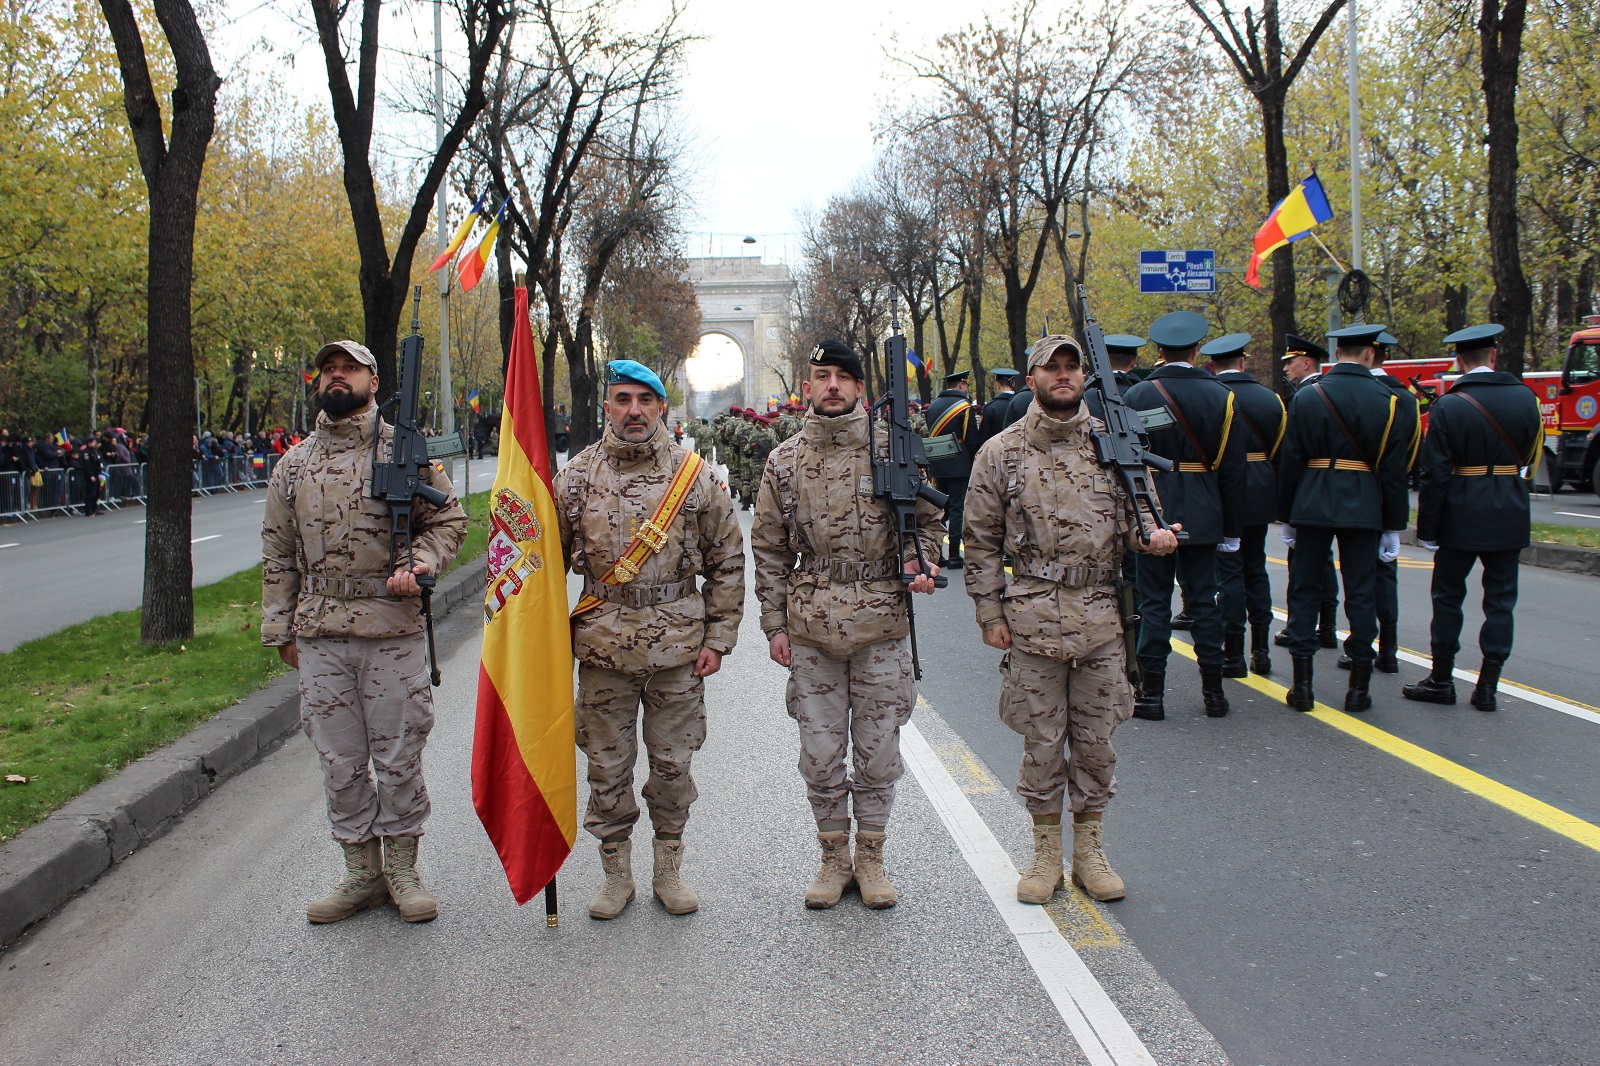 Spanish military personnel at the parade